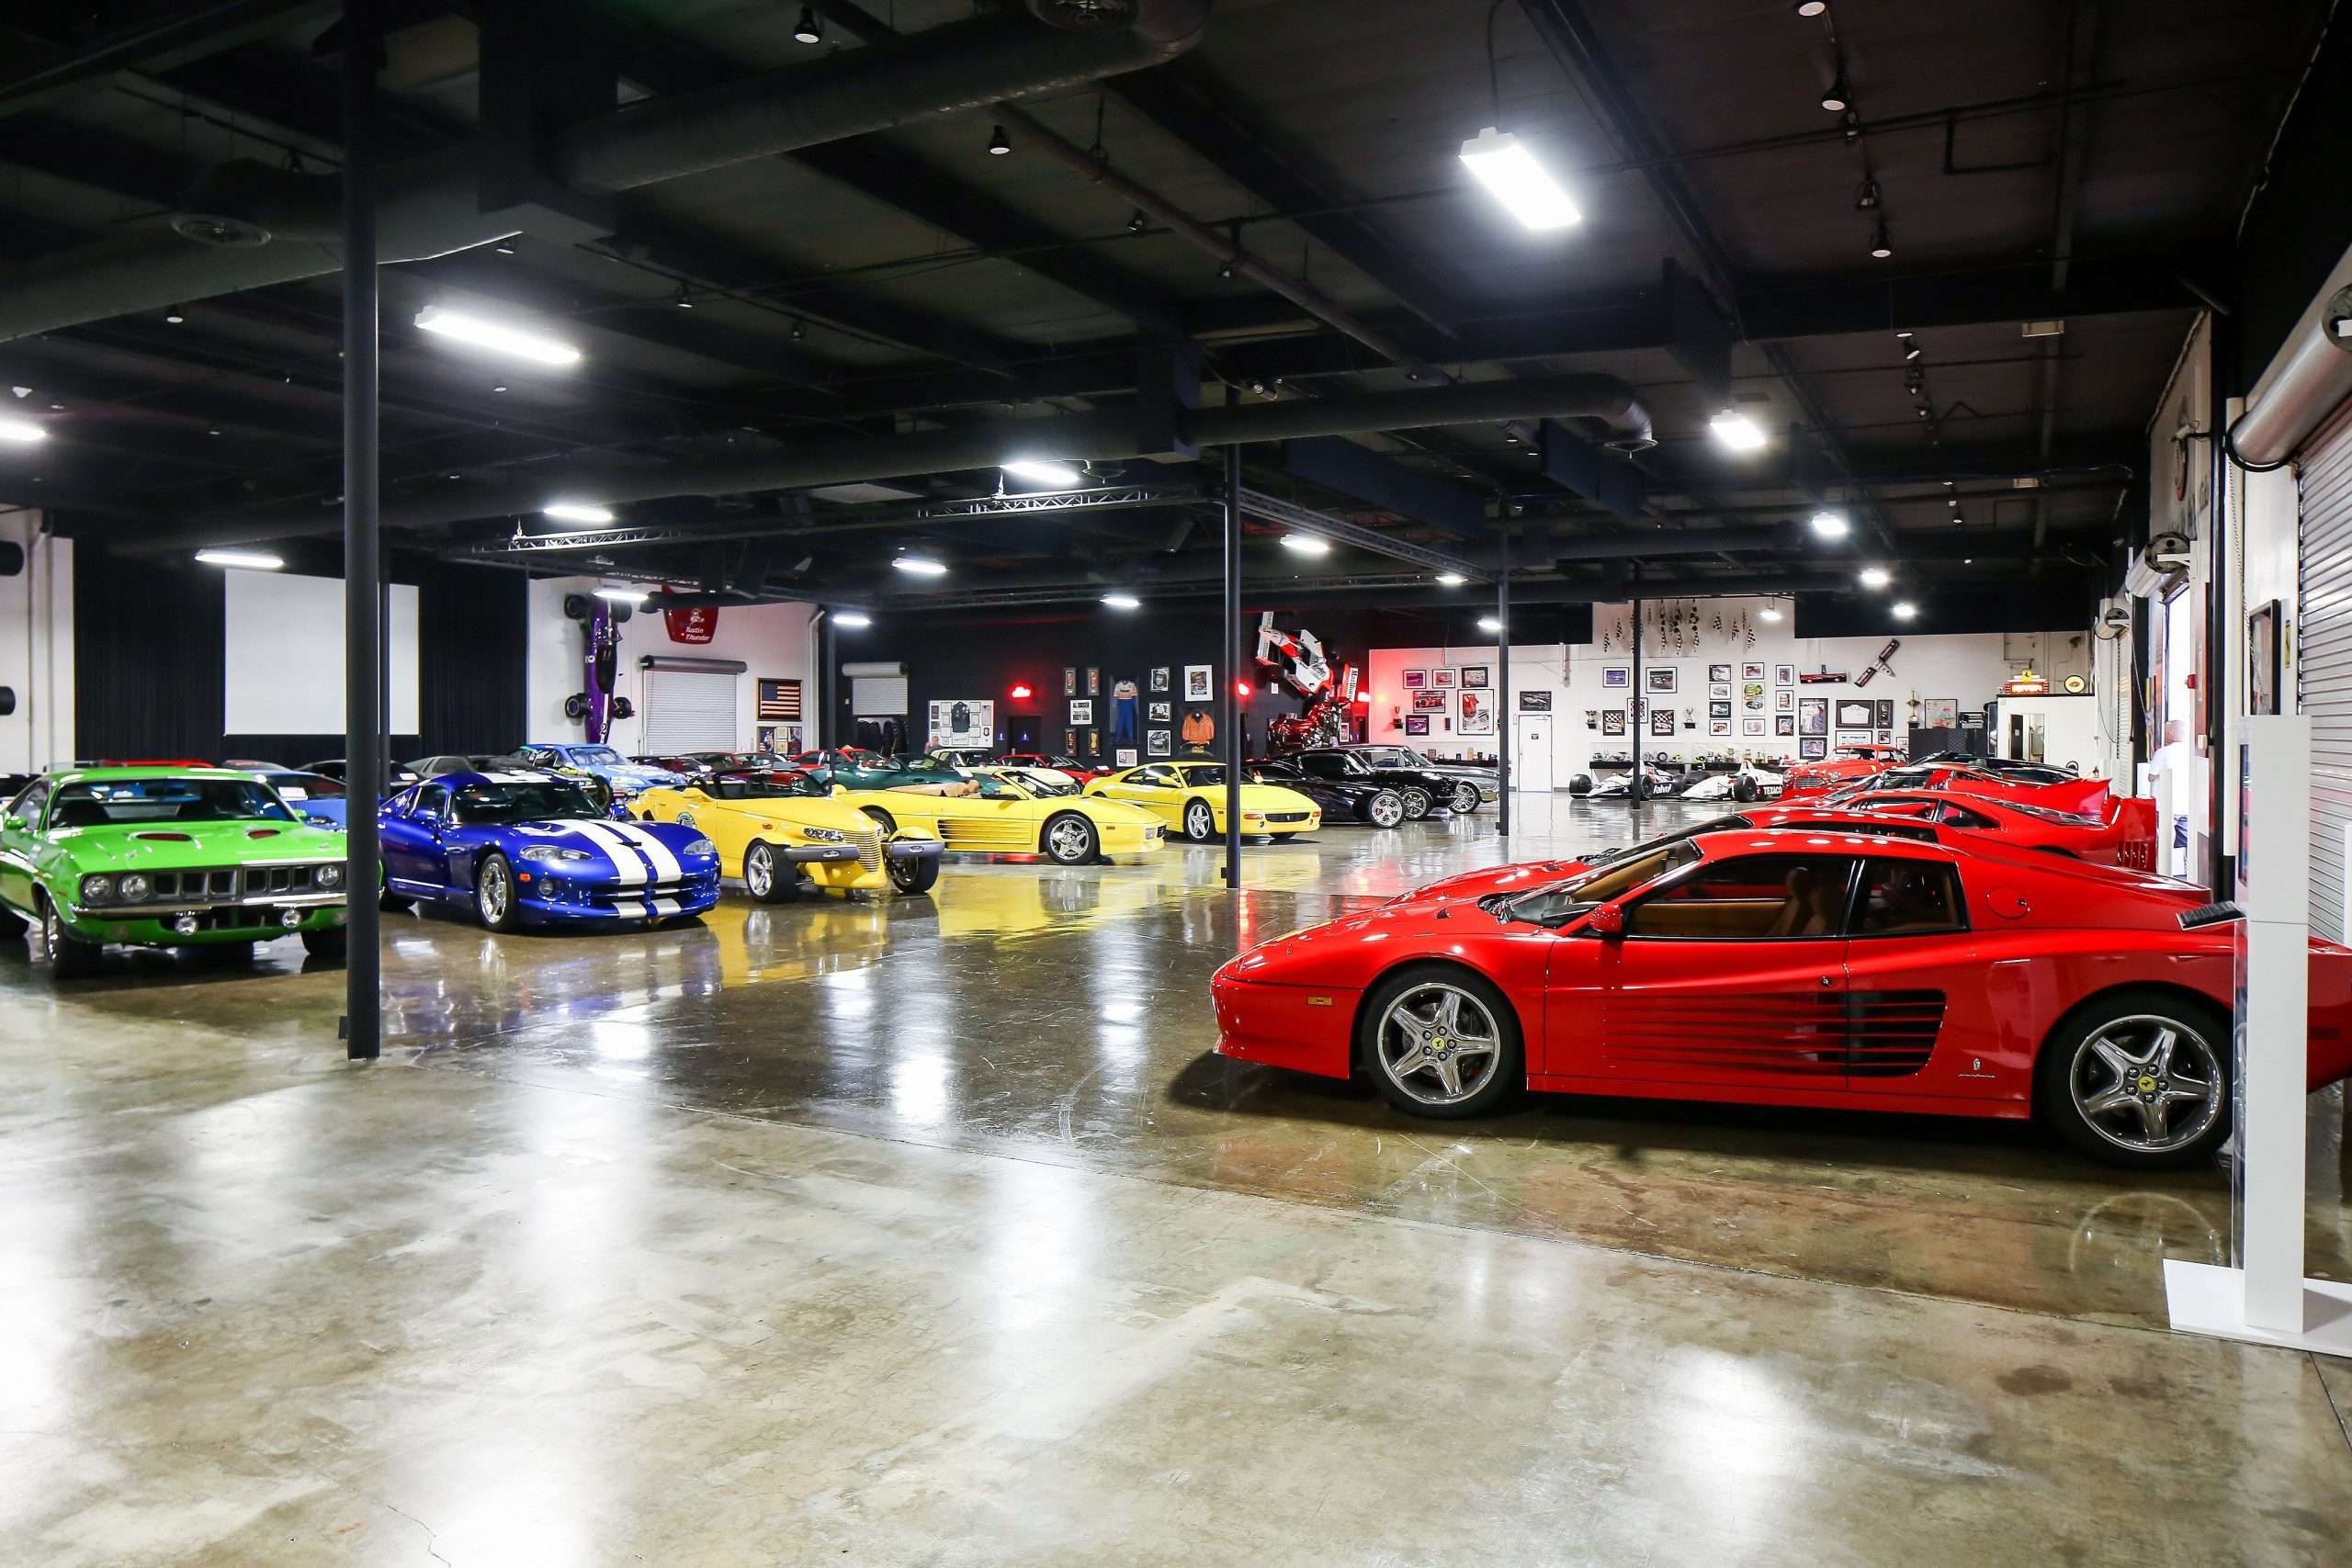 Los Angeles Car Museums and Attractions for Auto Buffs